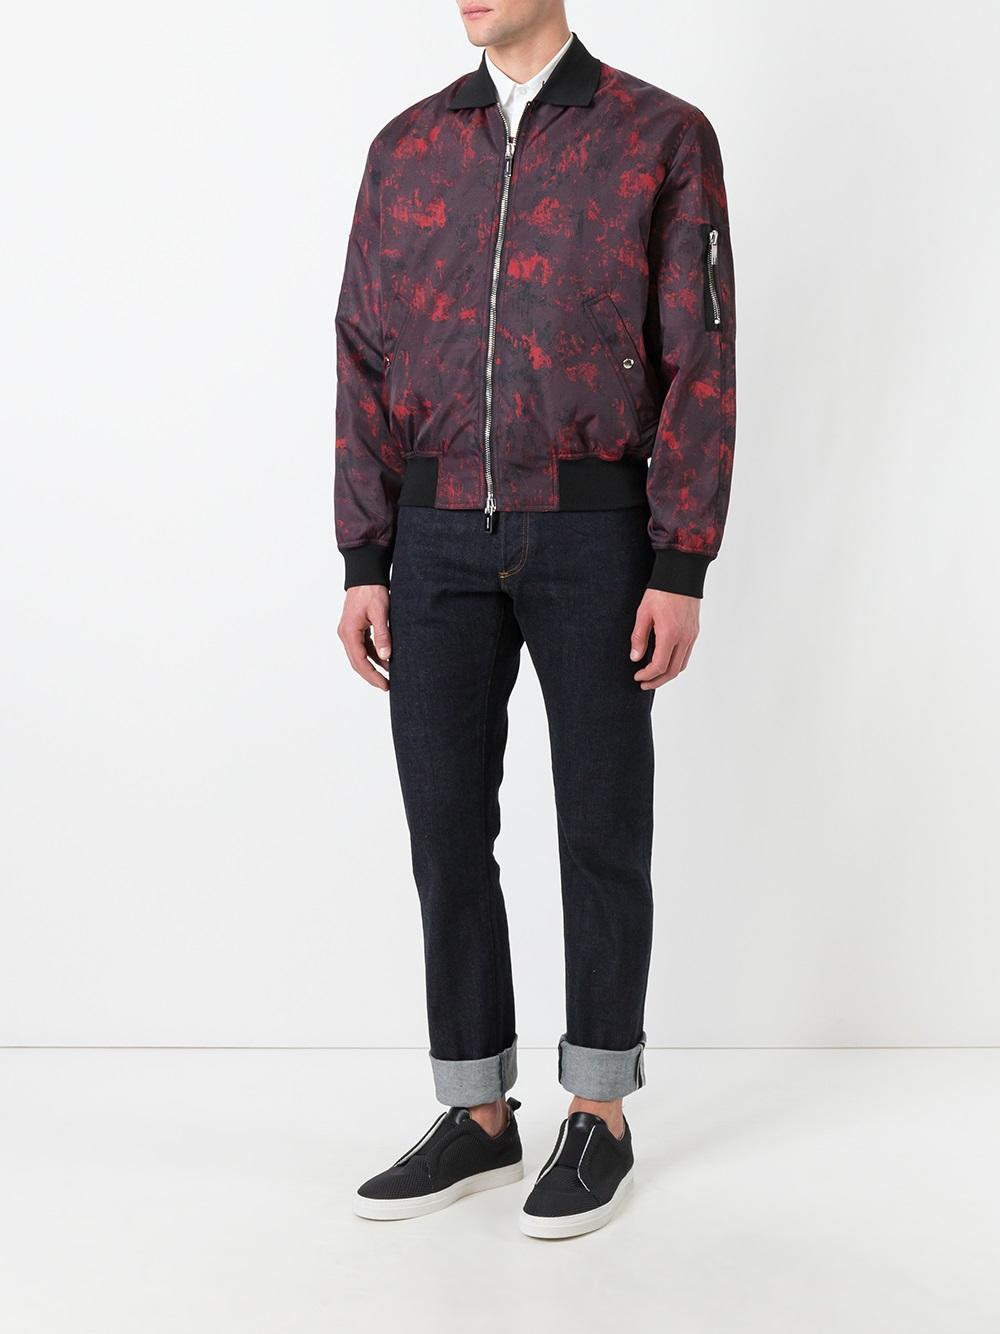 Dior Homme Synthetic Abstract Print Bomber Jacket in Red for Men - Lyst